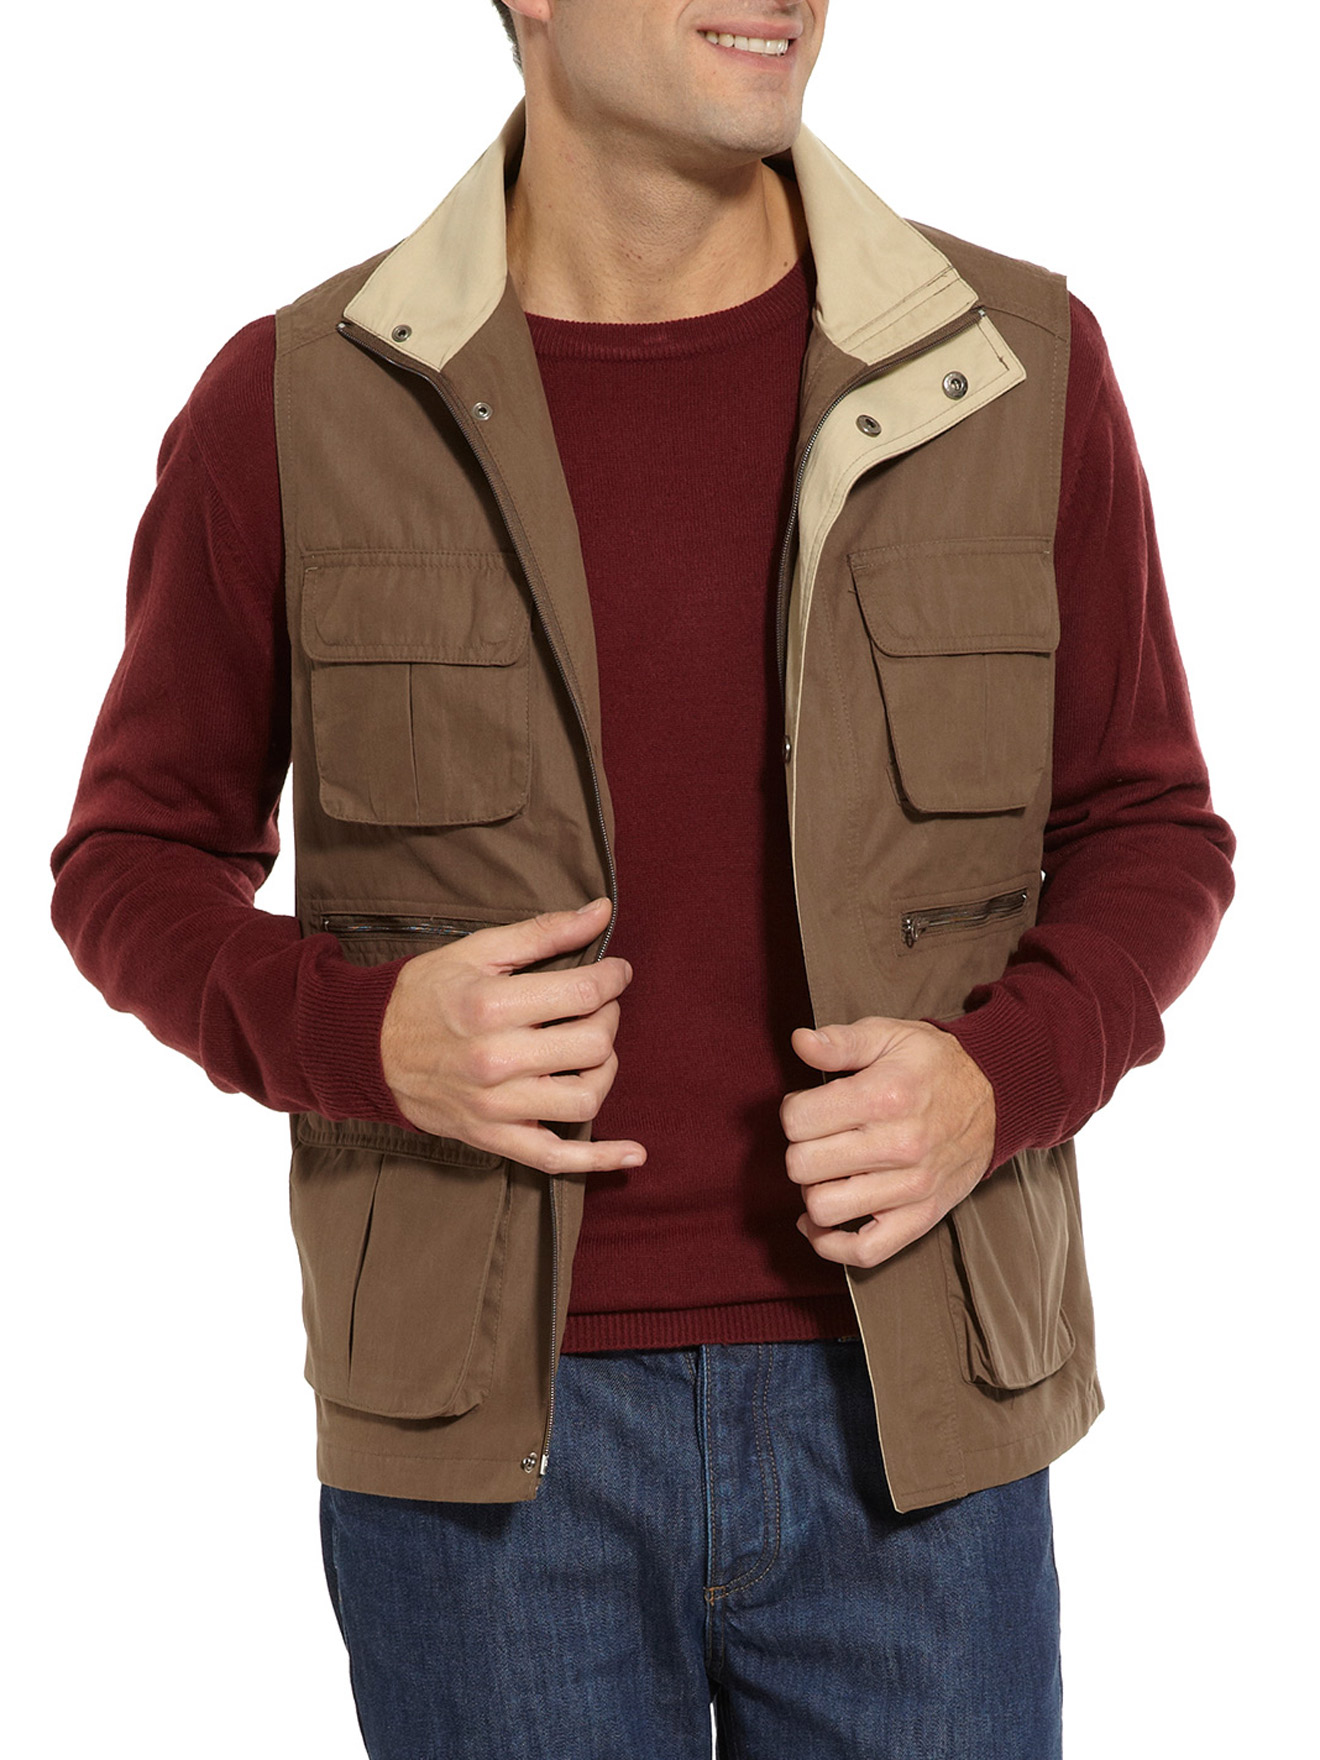 gilet sans manches homme multipoches